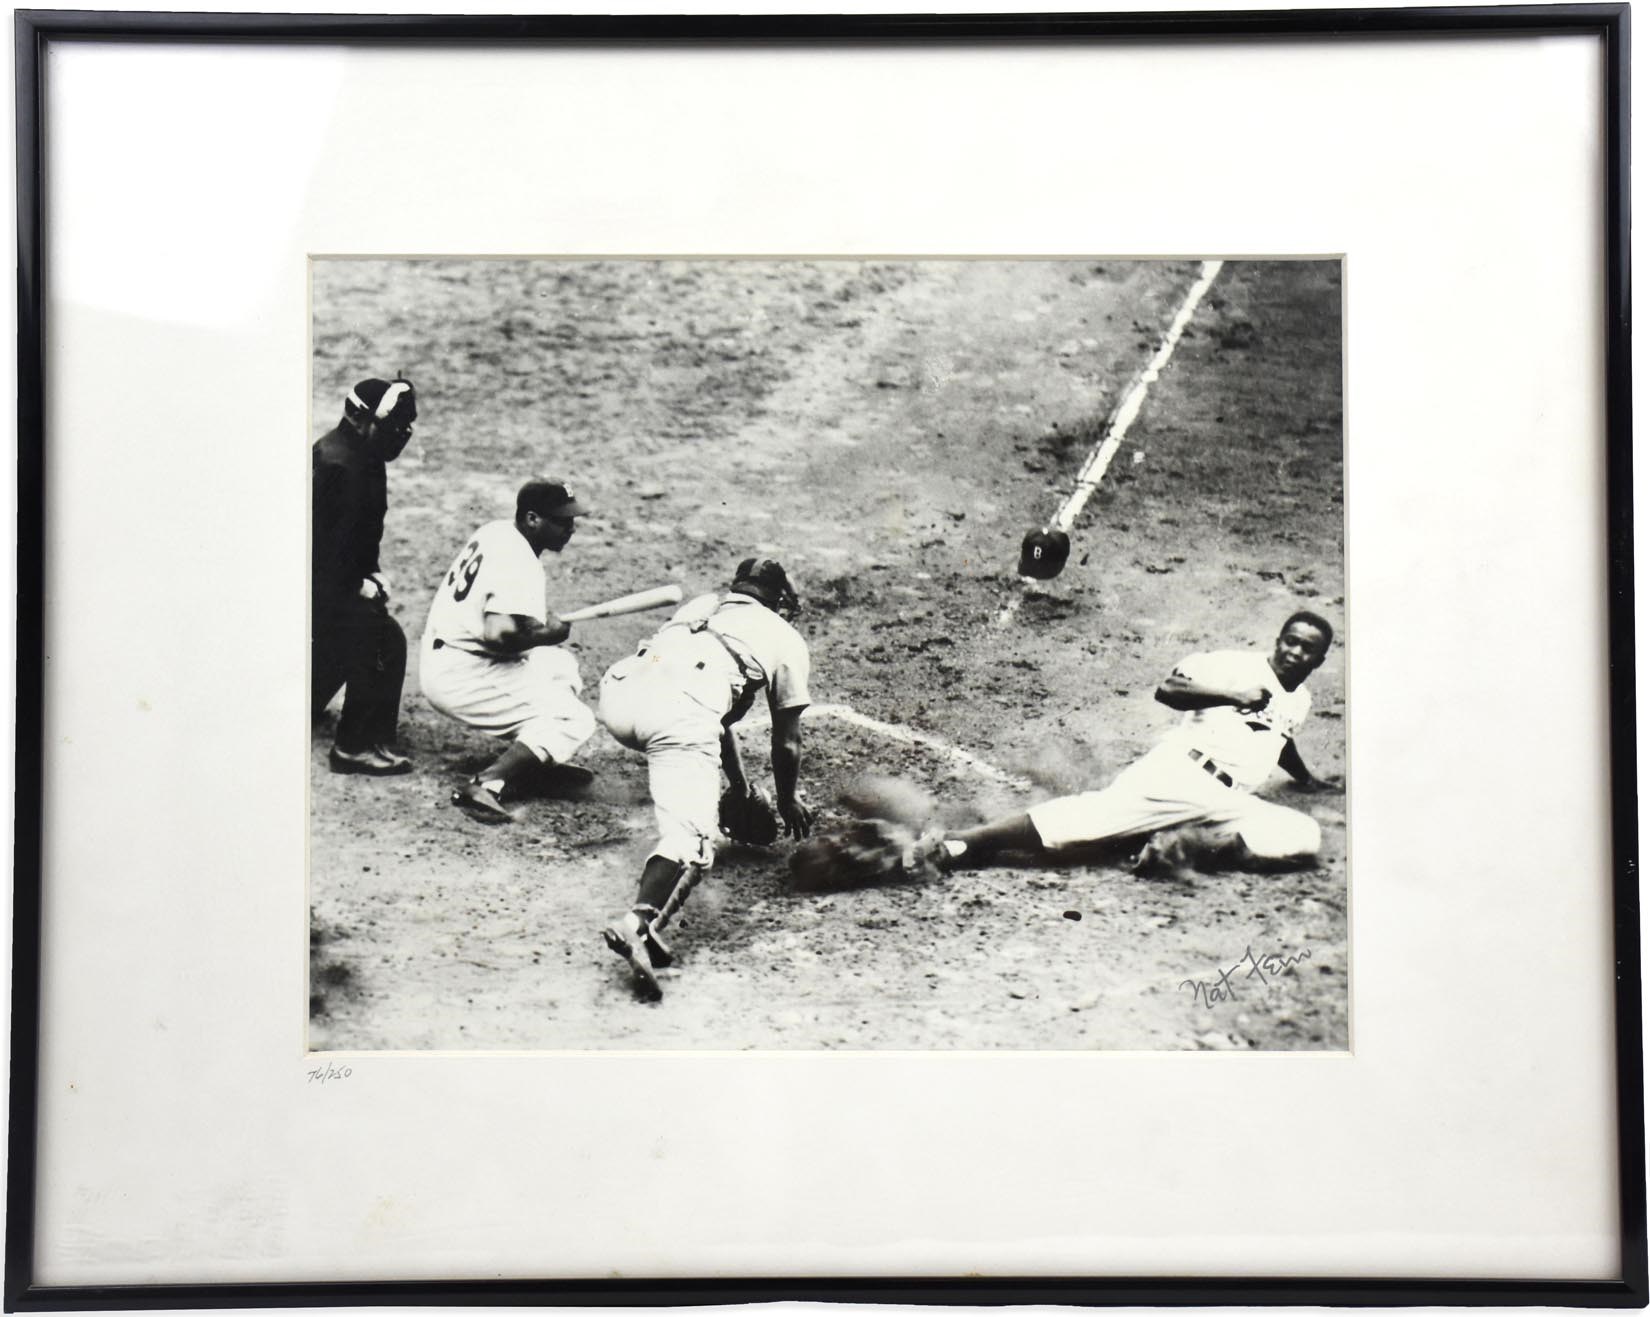 Jackie Robinson "Stealing Home" Photograph Signed & by Pulitzer Prize Winner Nat Fein